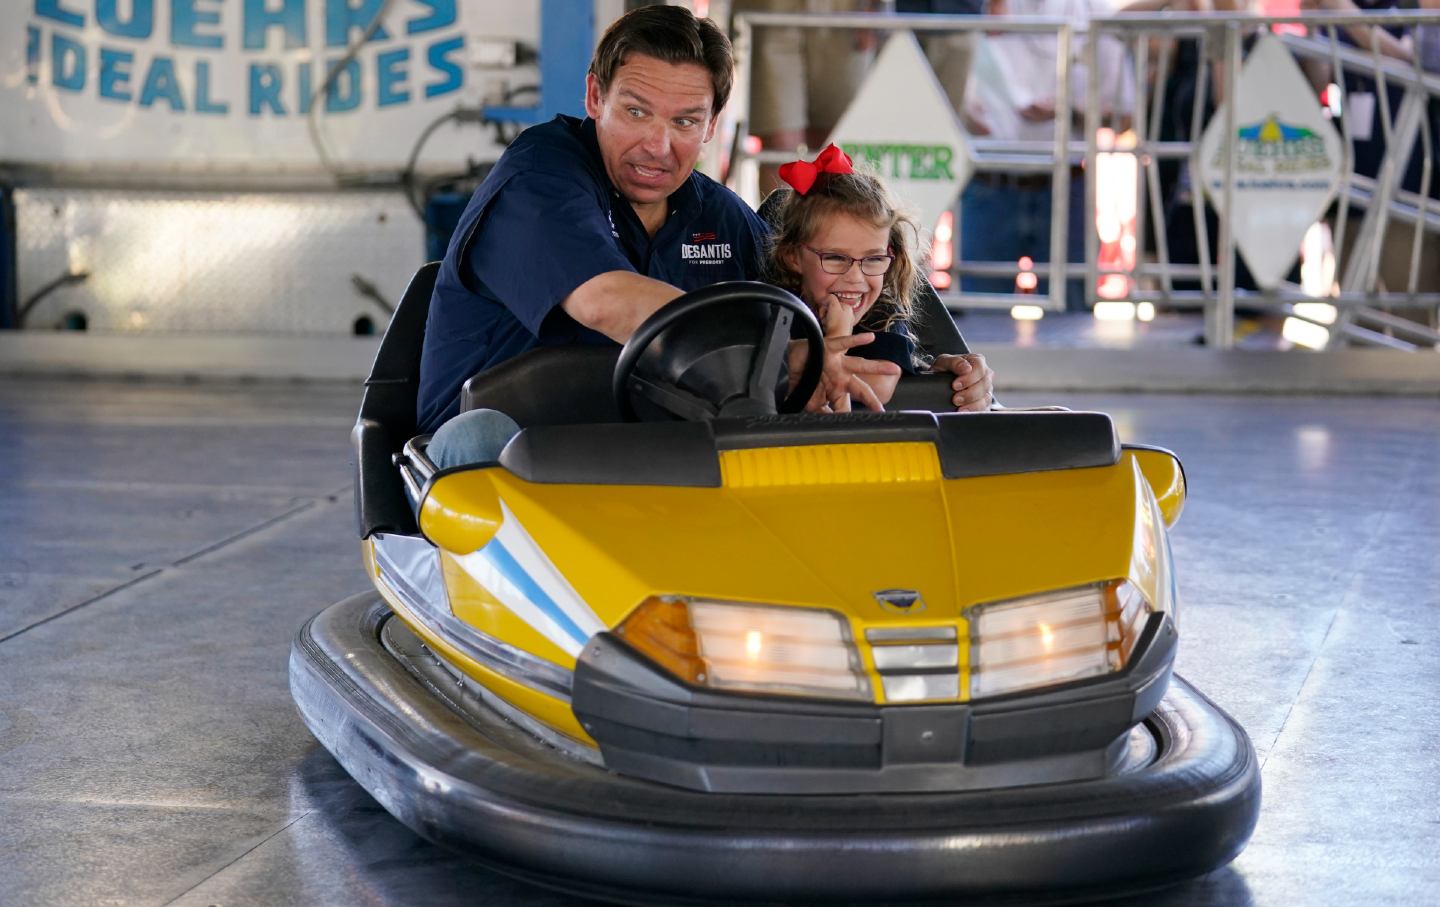 Republican presidential candidate Florida Governor Ron DeSantis drives a bumper car as his daughter Madison laughs at the Iowa State Fair on August 12, 2023, in Des Moines, Iowa